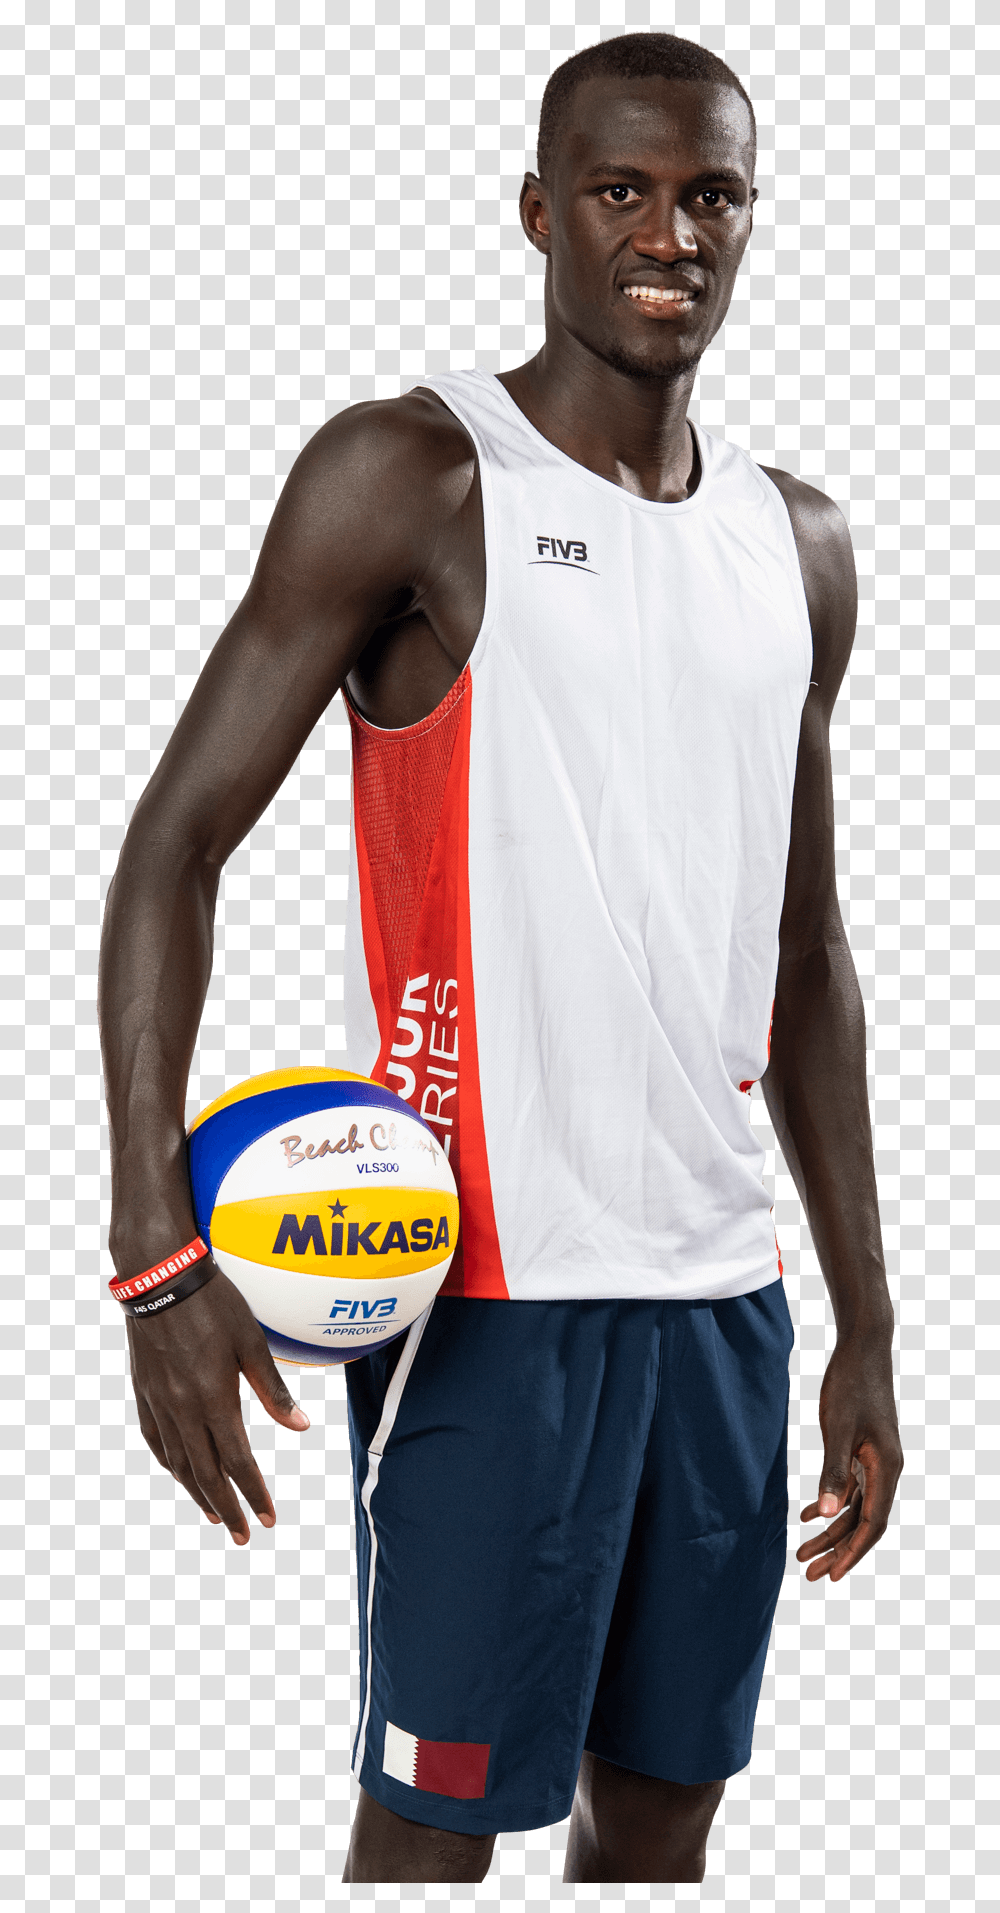 Beach Volleyball Major Series Volleyball Player, Clothing, Apparel, Sphere, Person Transparent Png